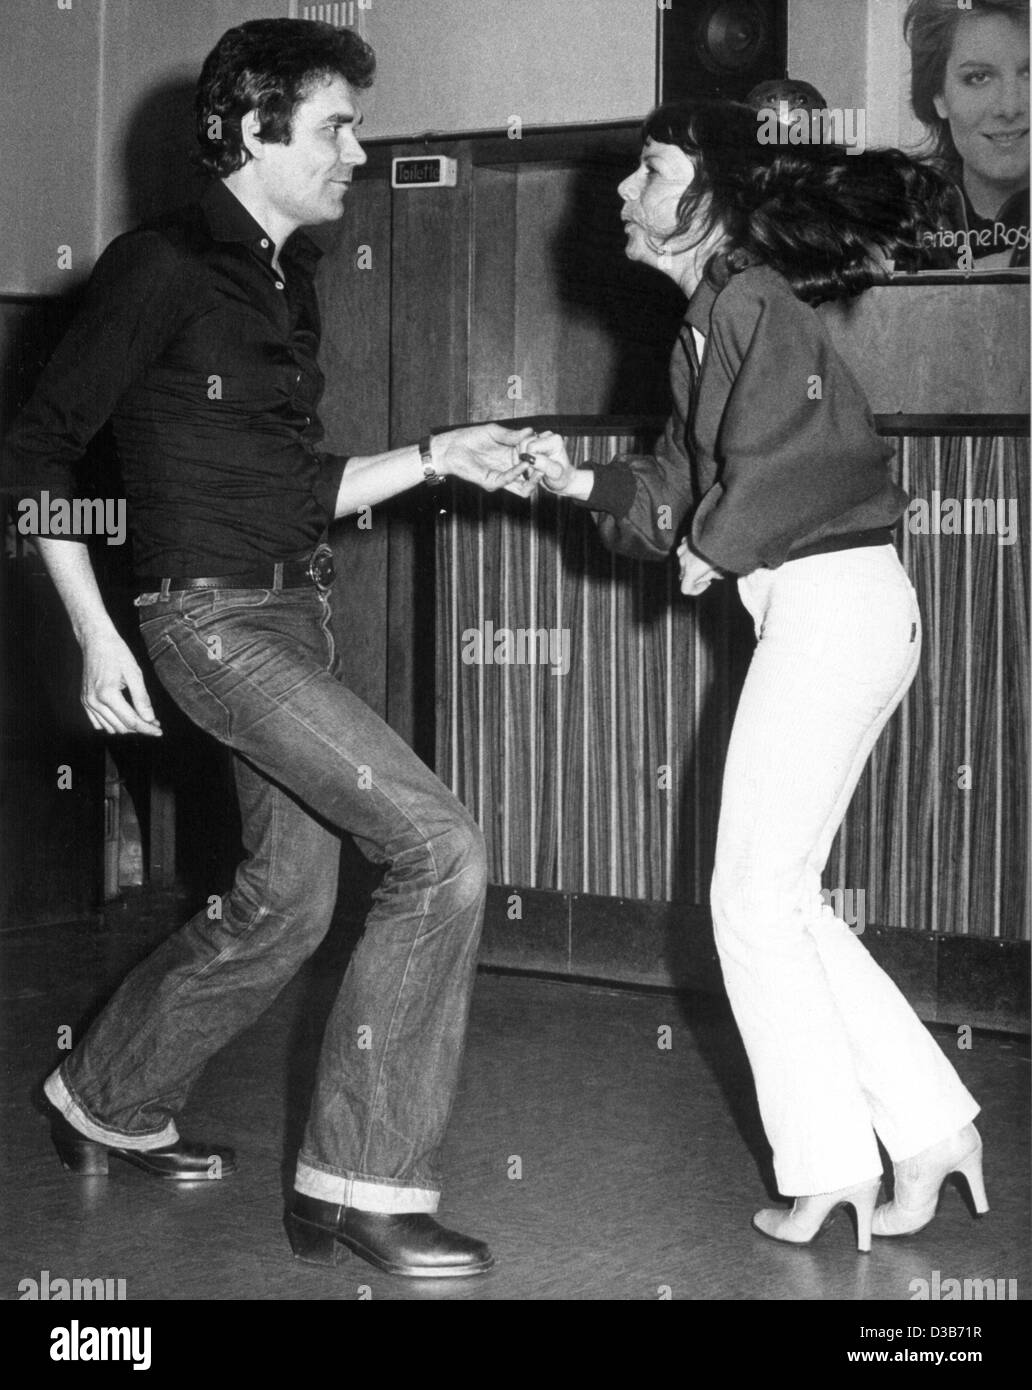 (dpa files) - German Rock'N'Roll legend Ted Herold dances the Rock'N'Roll with his then wife Karin in Nauborn, Germany, April 1978. Herold will celebrate his 60th birthday on 9 September 2002. He started his career in his high school time after he had got a guitar for Christmas in 1956. 'The German  Stock Photo